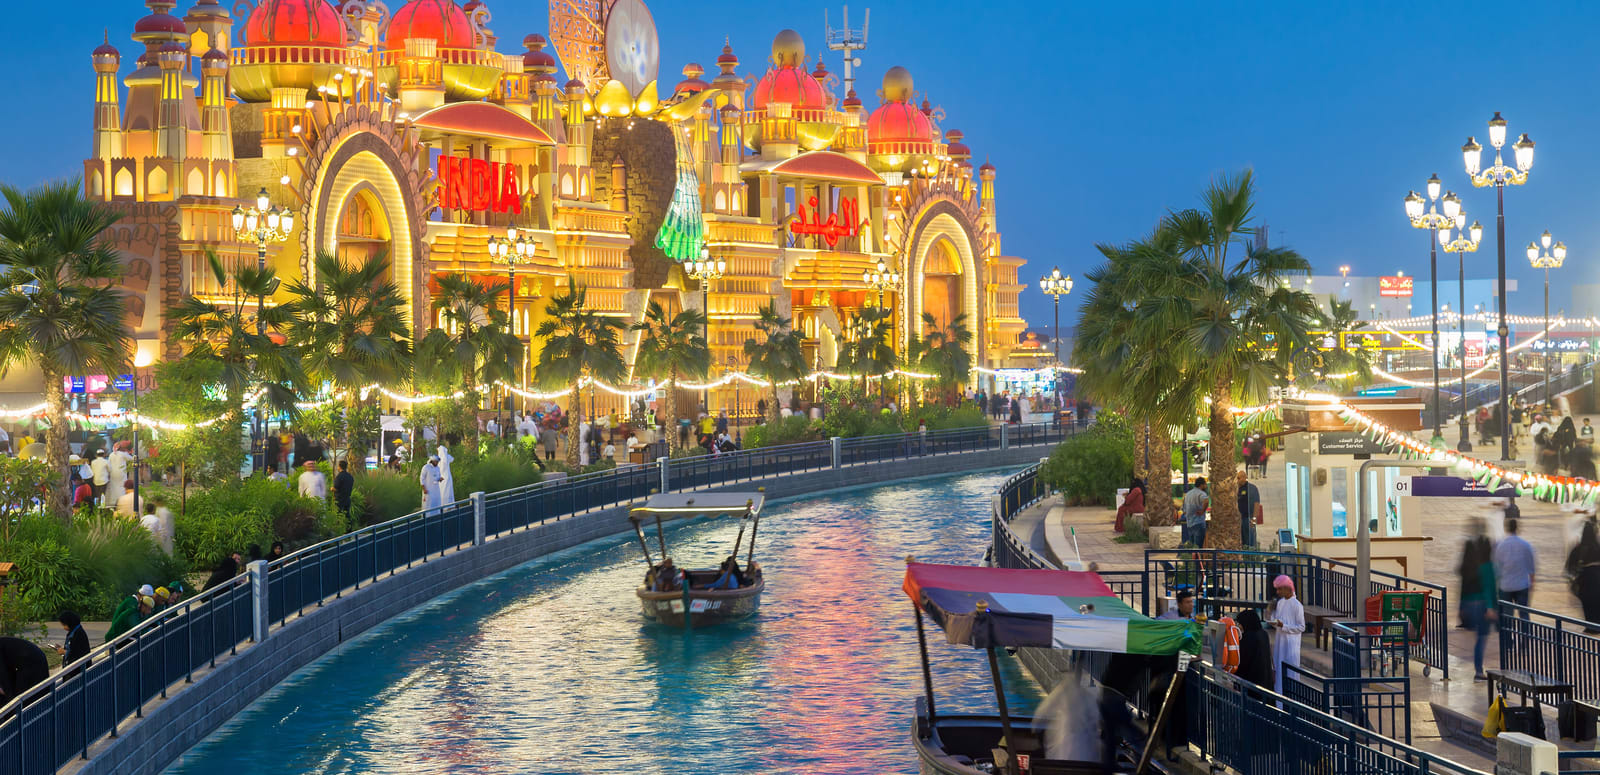 Global Village Announces Re Opening Date For October 2021 Esquire Middle East